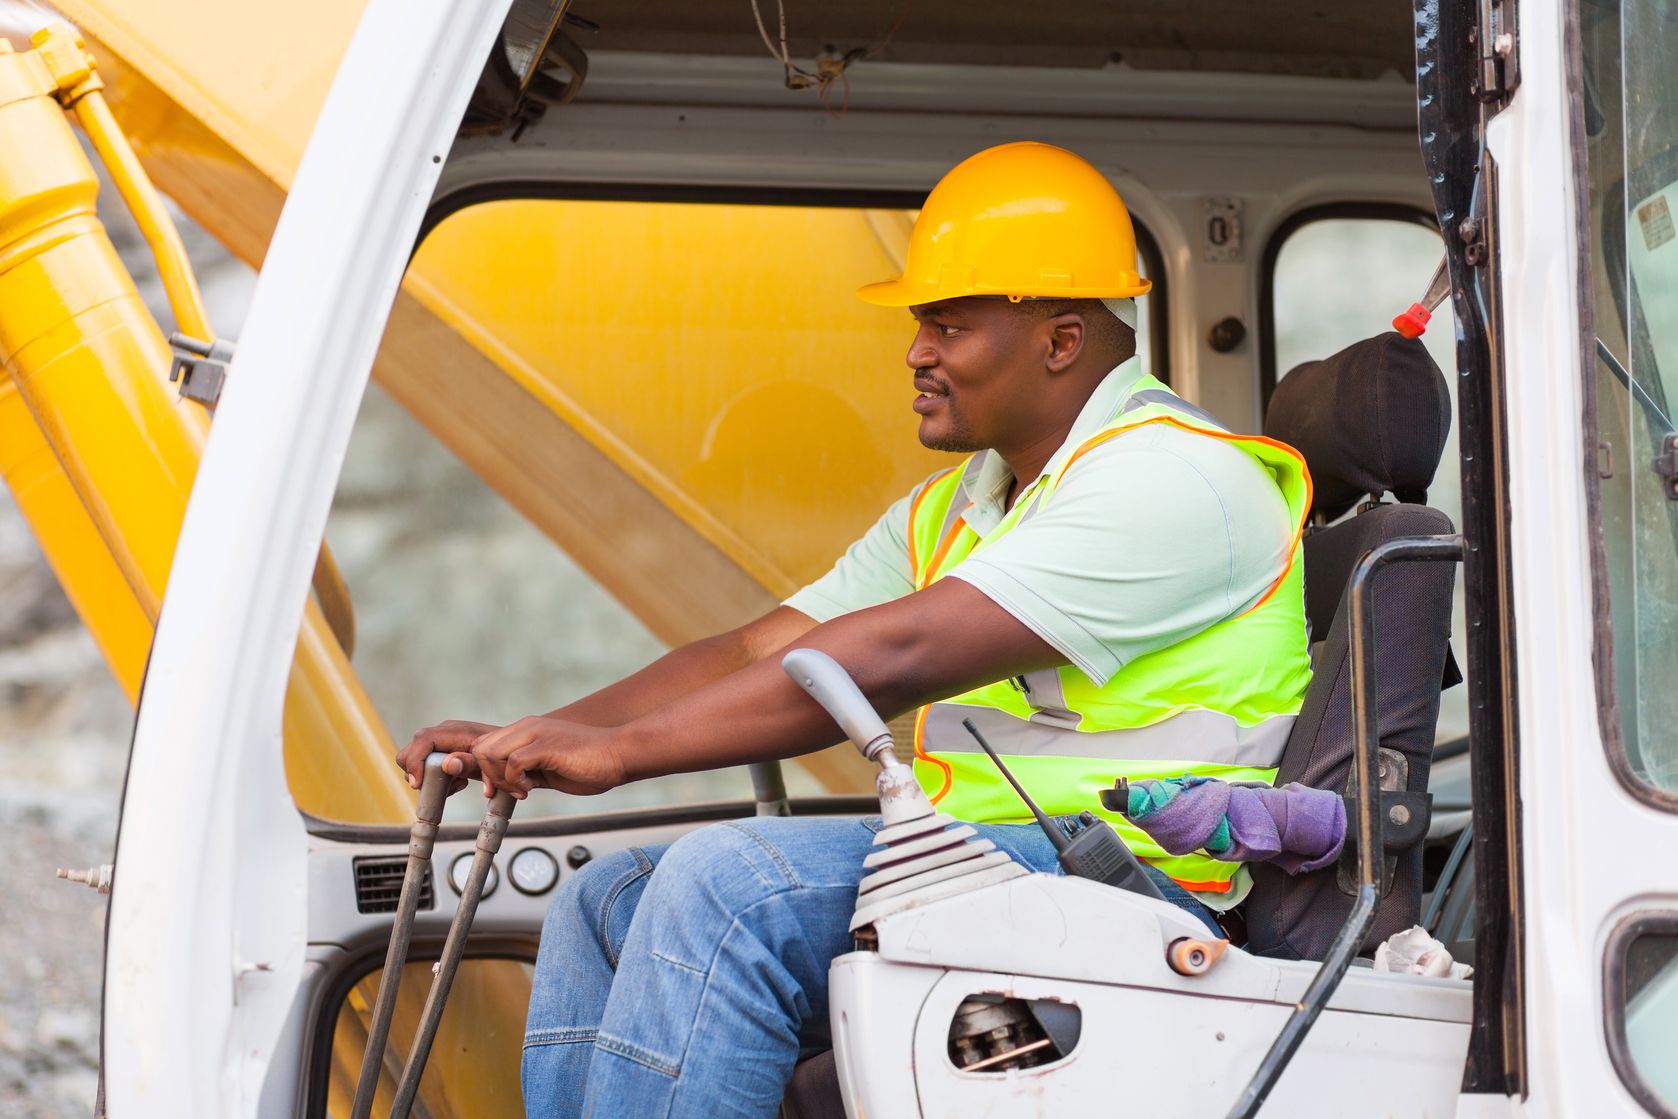 A Black male wearing a safety vest and hat operates a construction crane.